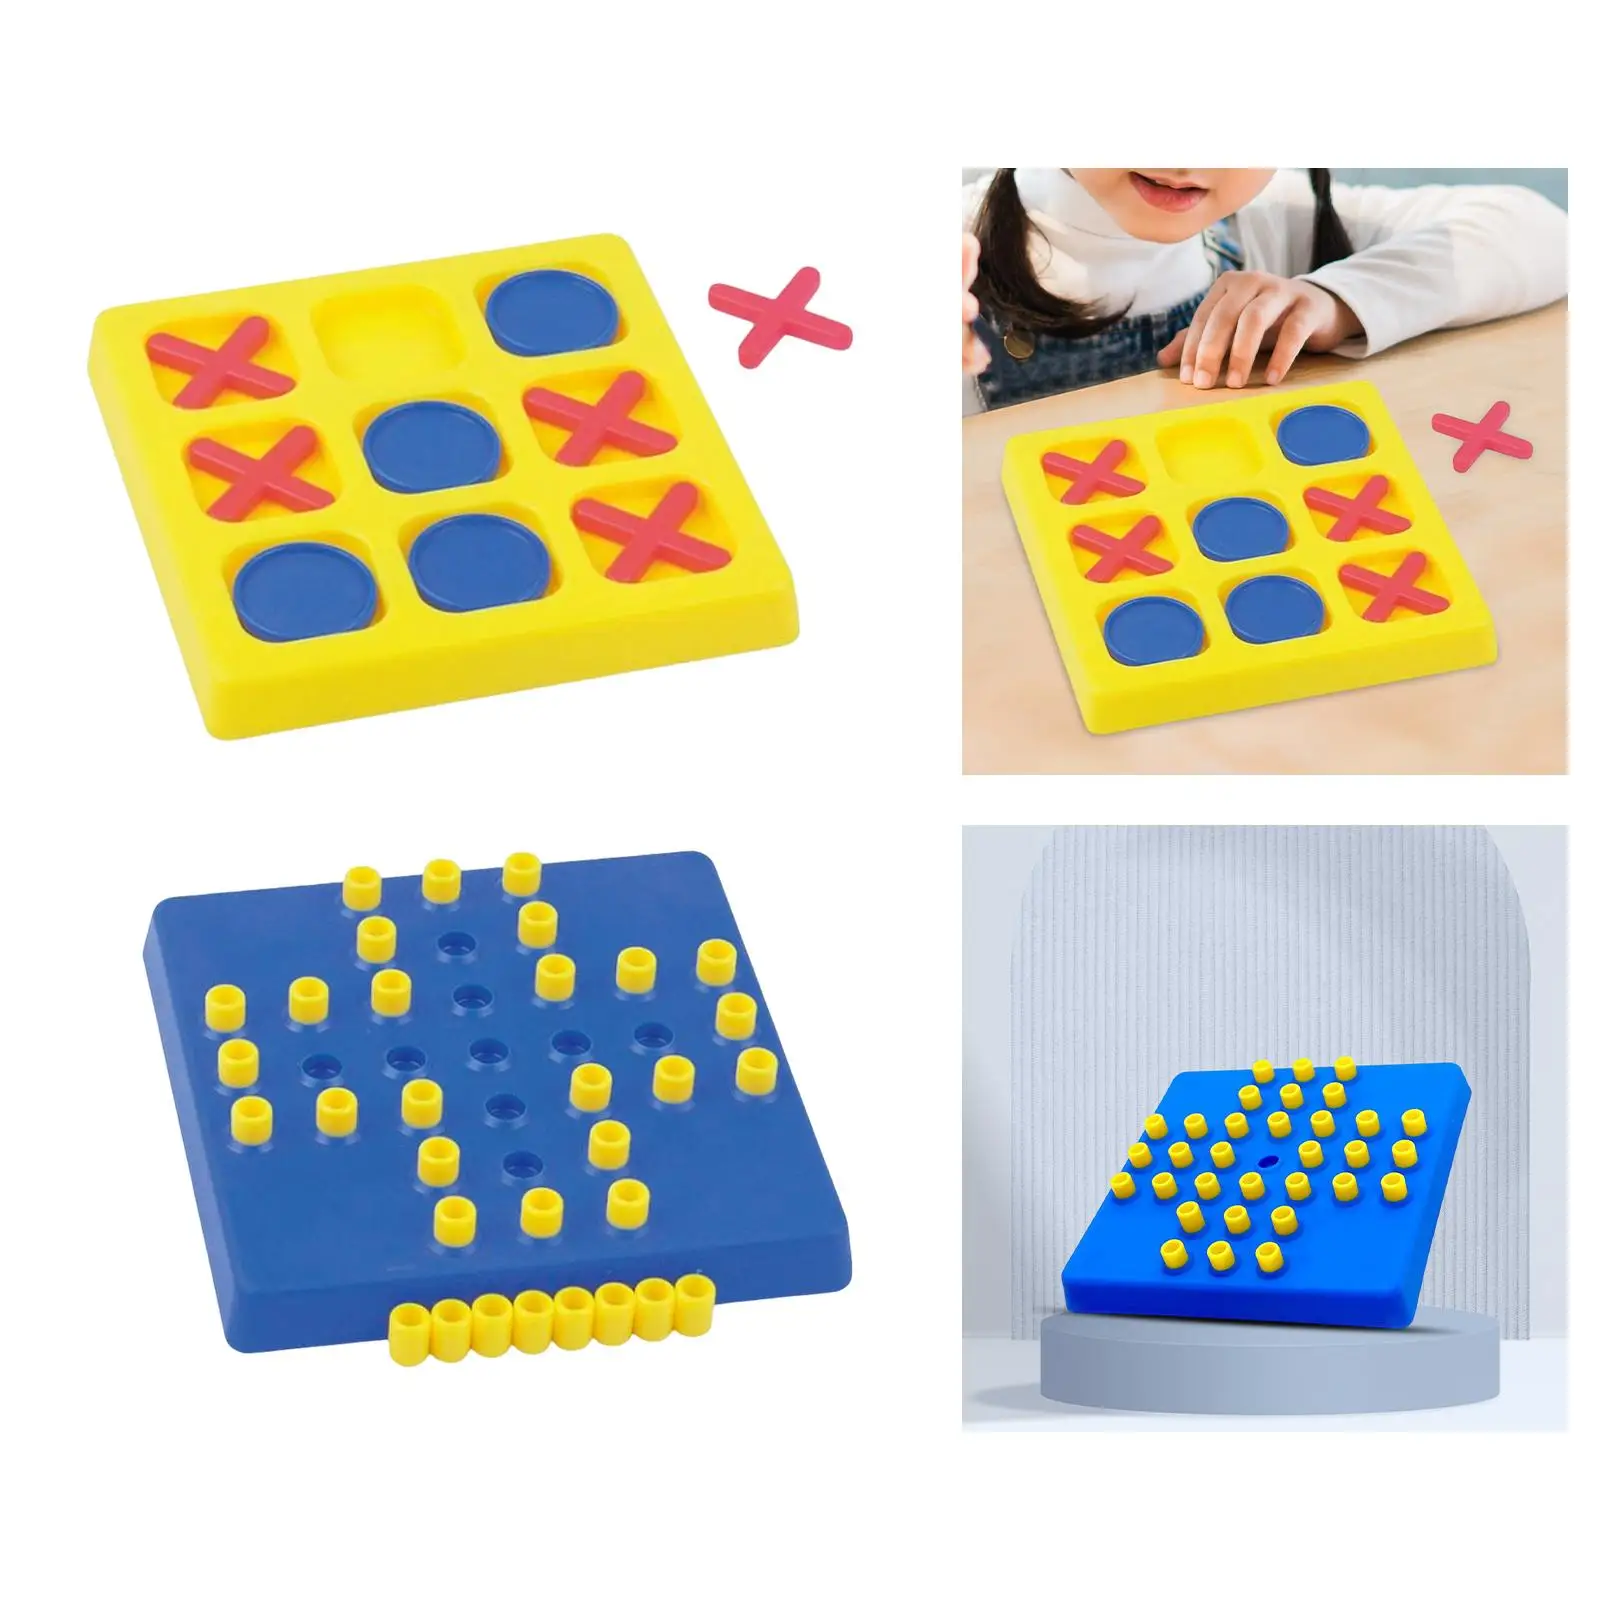 Tic TAC Toe IQ Puzzle Jump Marbles Peg Solitaire Board Game for Outdoor